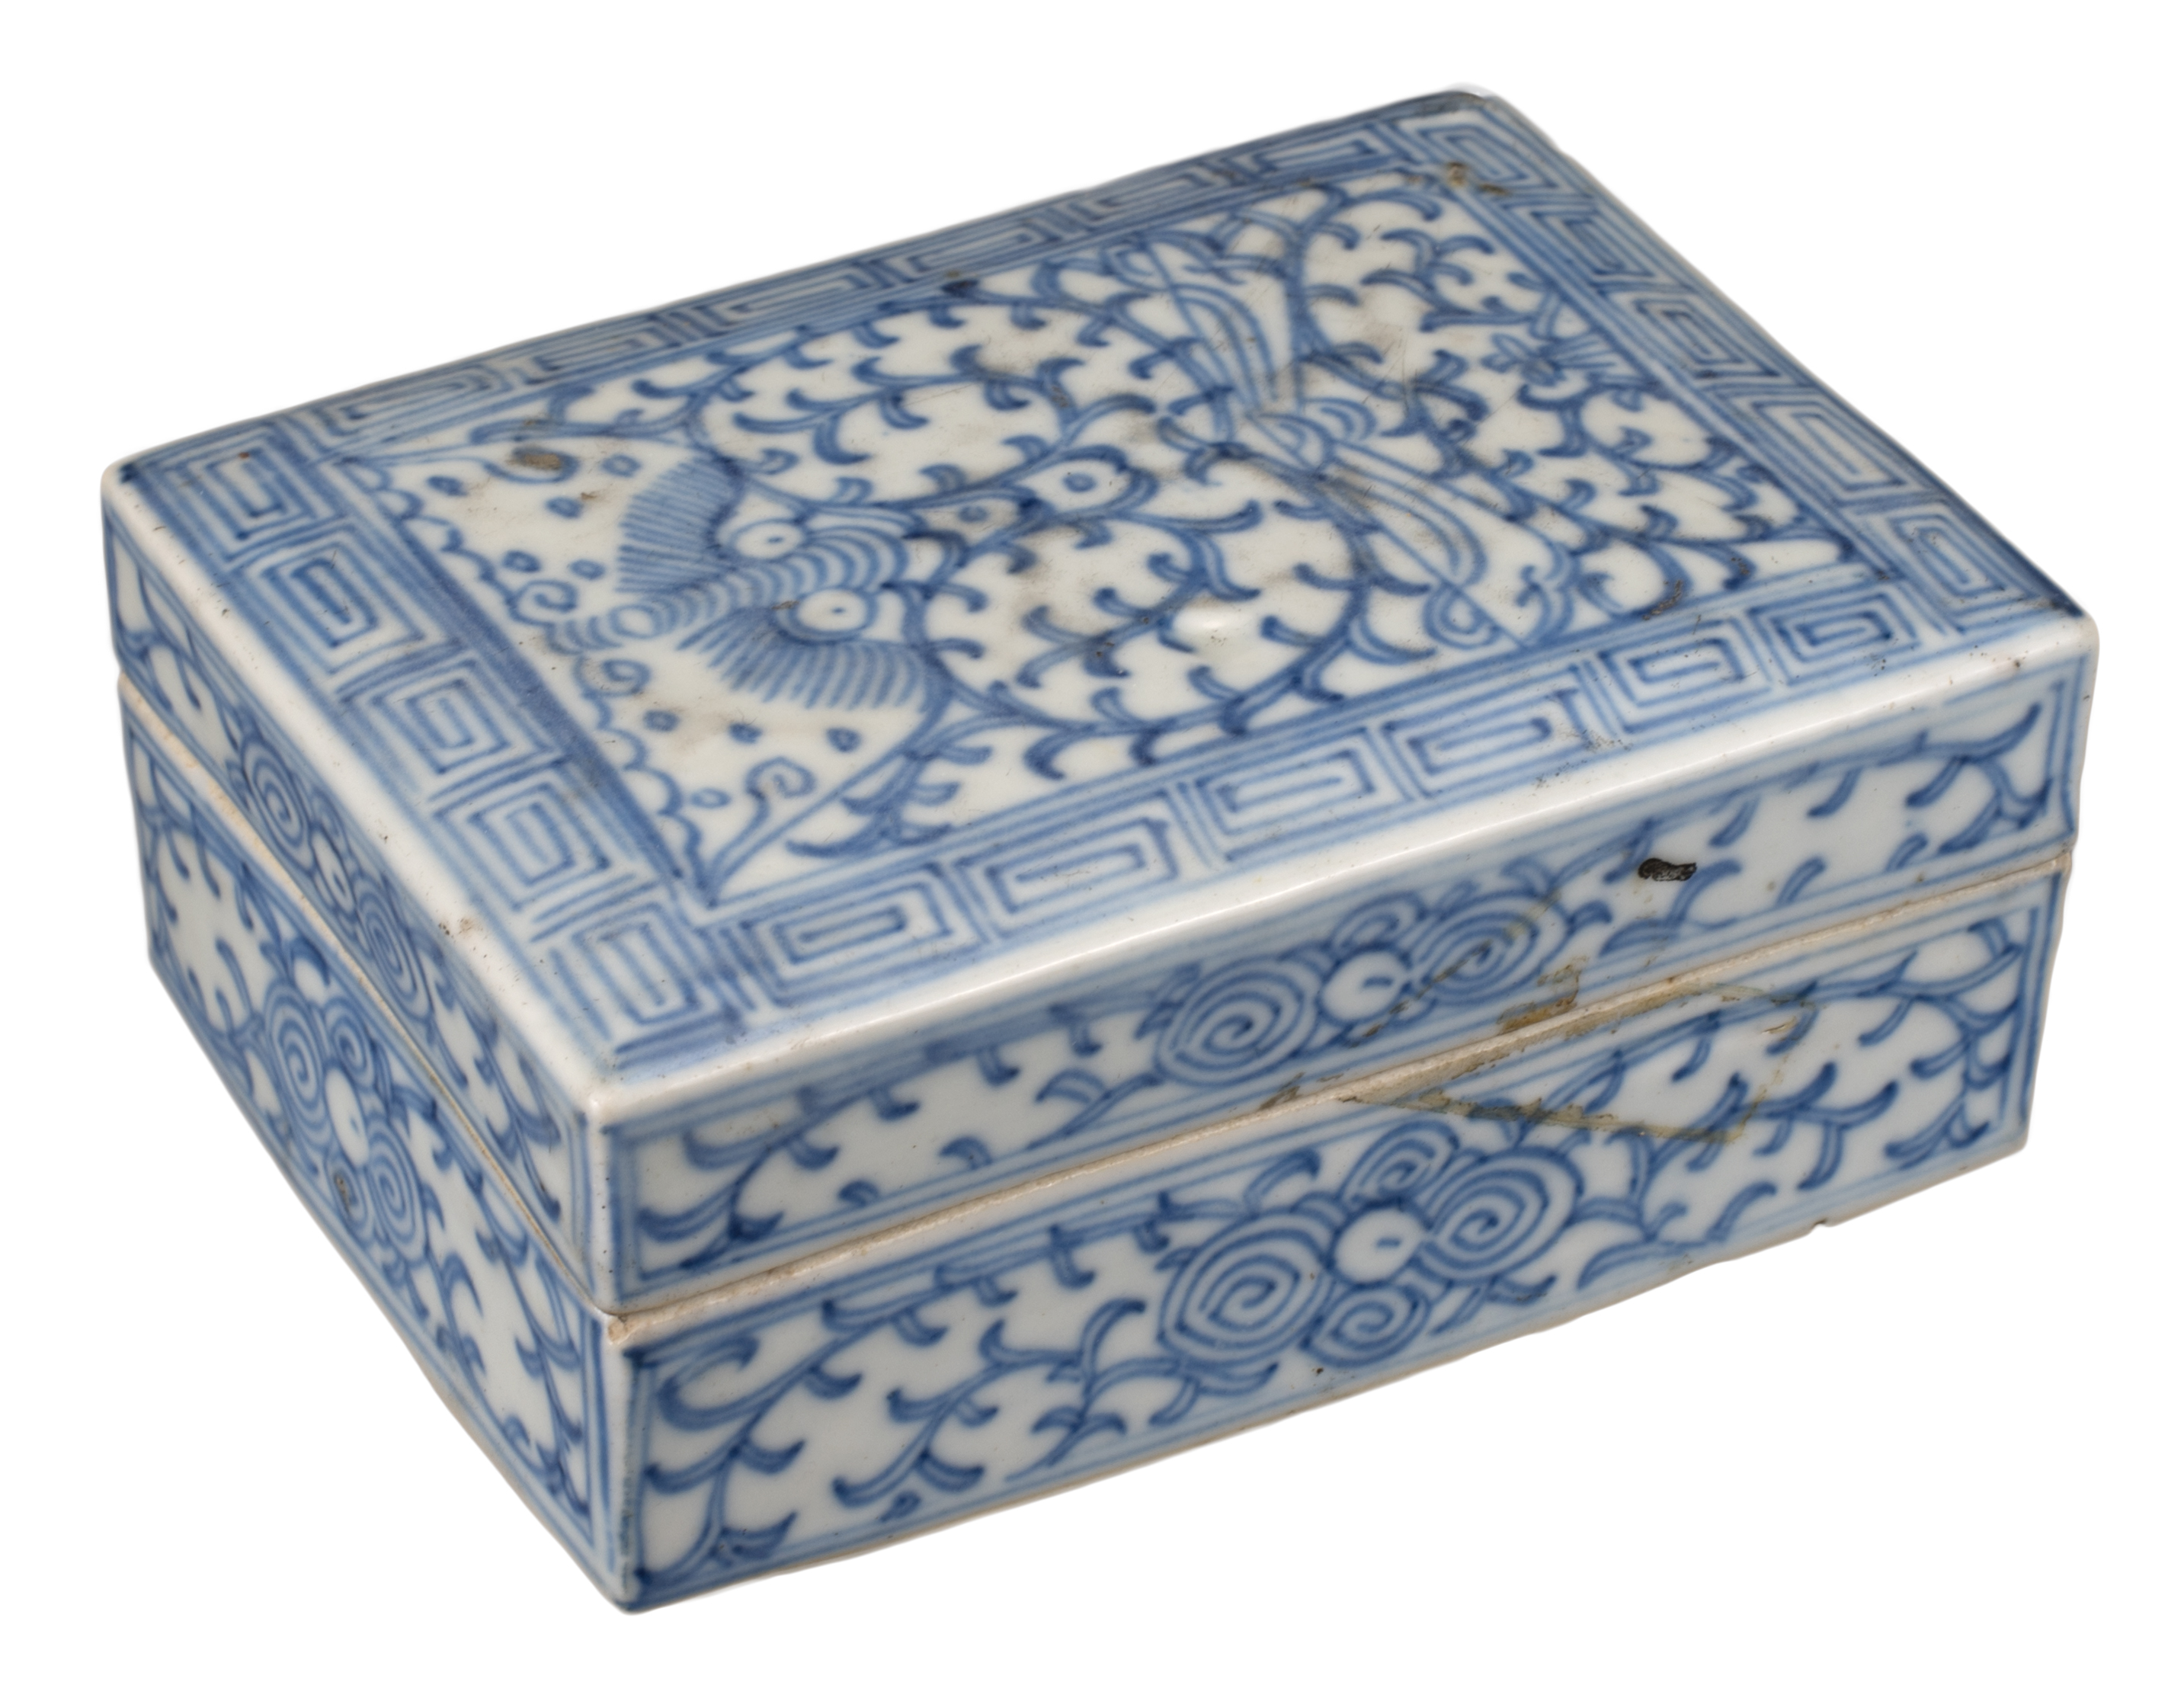 CHINESE BLUE AND WHITE PORCELAIN INK BOX AND COVER, JIAQING PERIOD, EARLY 19th CENTURY